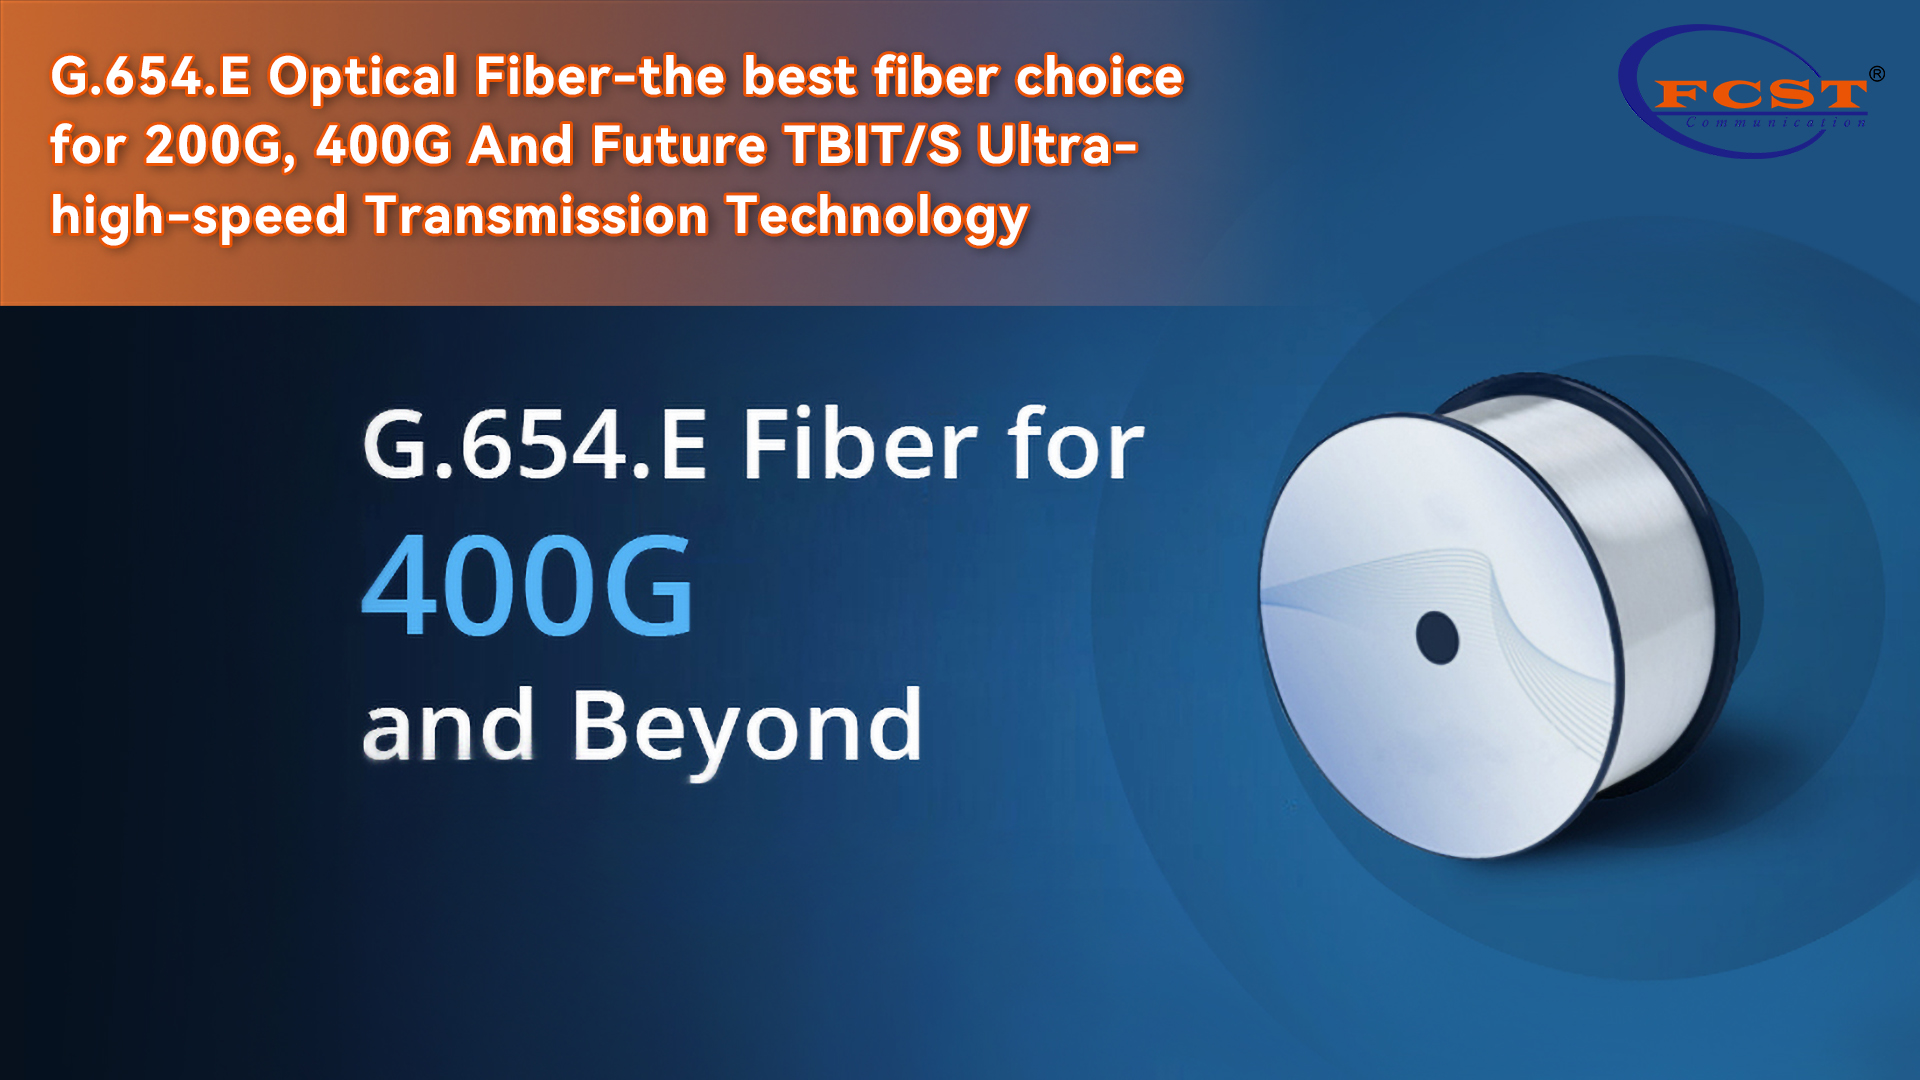 G.654.E Optical Fiber-The Best Fiber Choice For 200G, 400G And Future TBIT/S Ultra-high-speed Transmission Technology